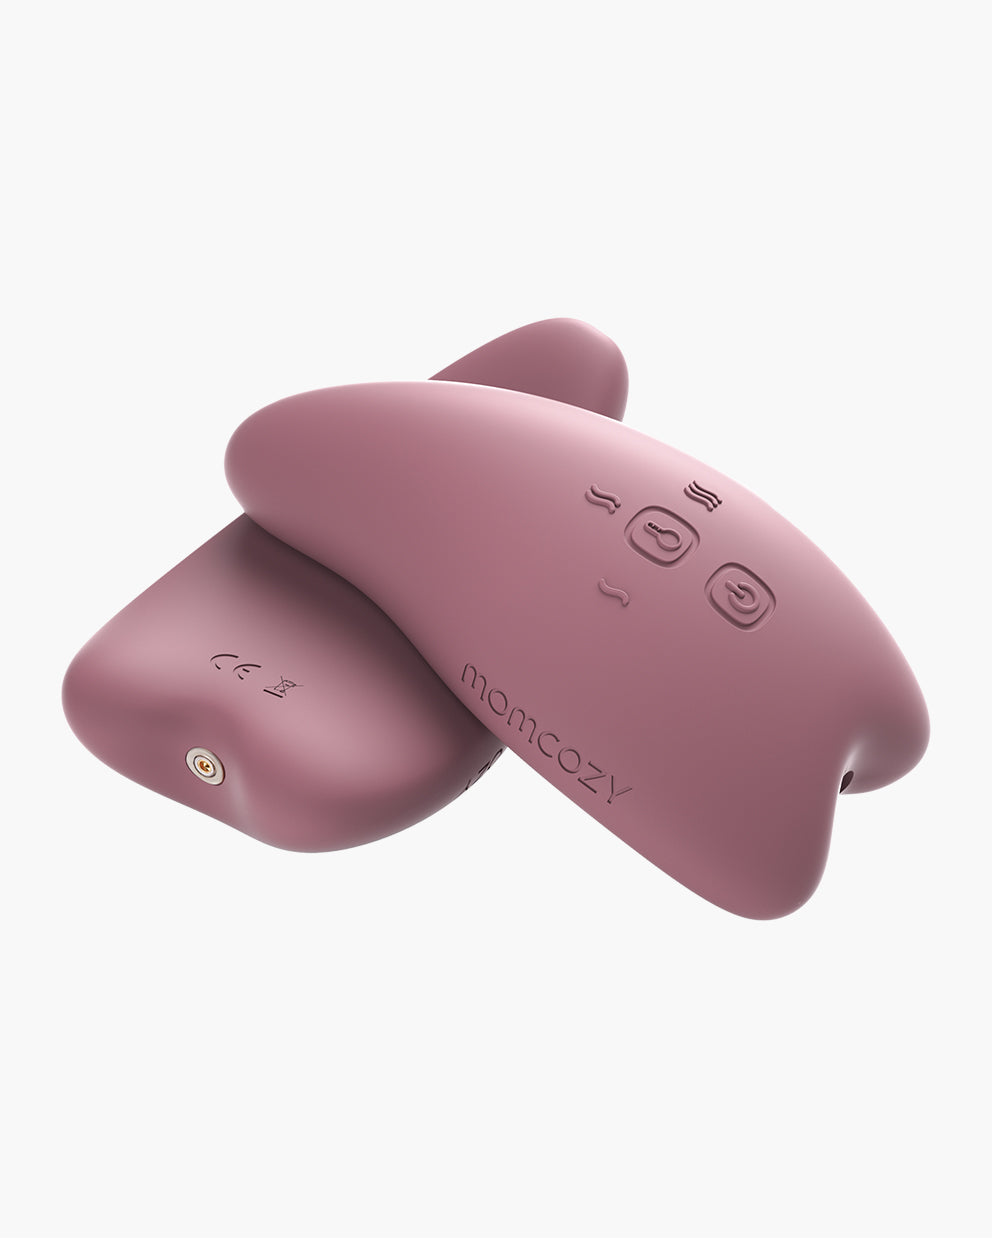 2023 Lactation Massagers: Heat & Vibration for Breast Massage, by Ines